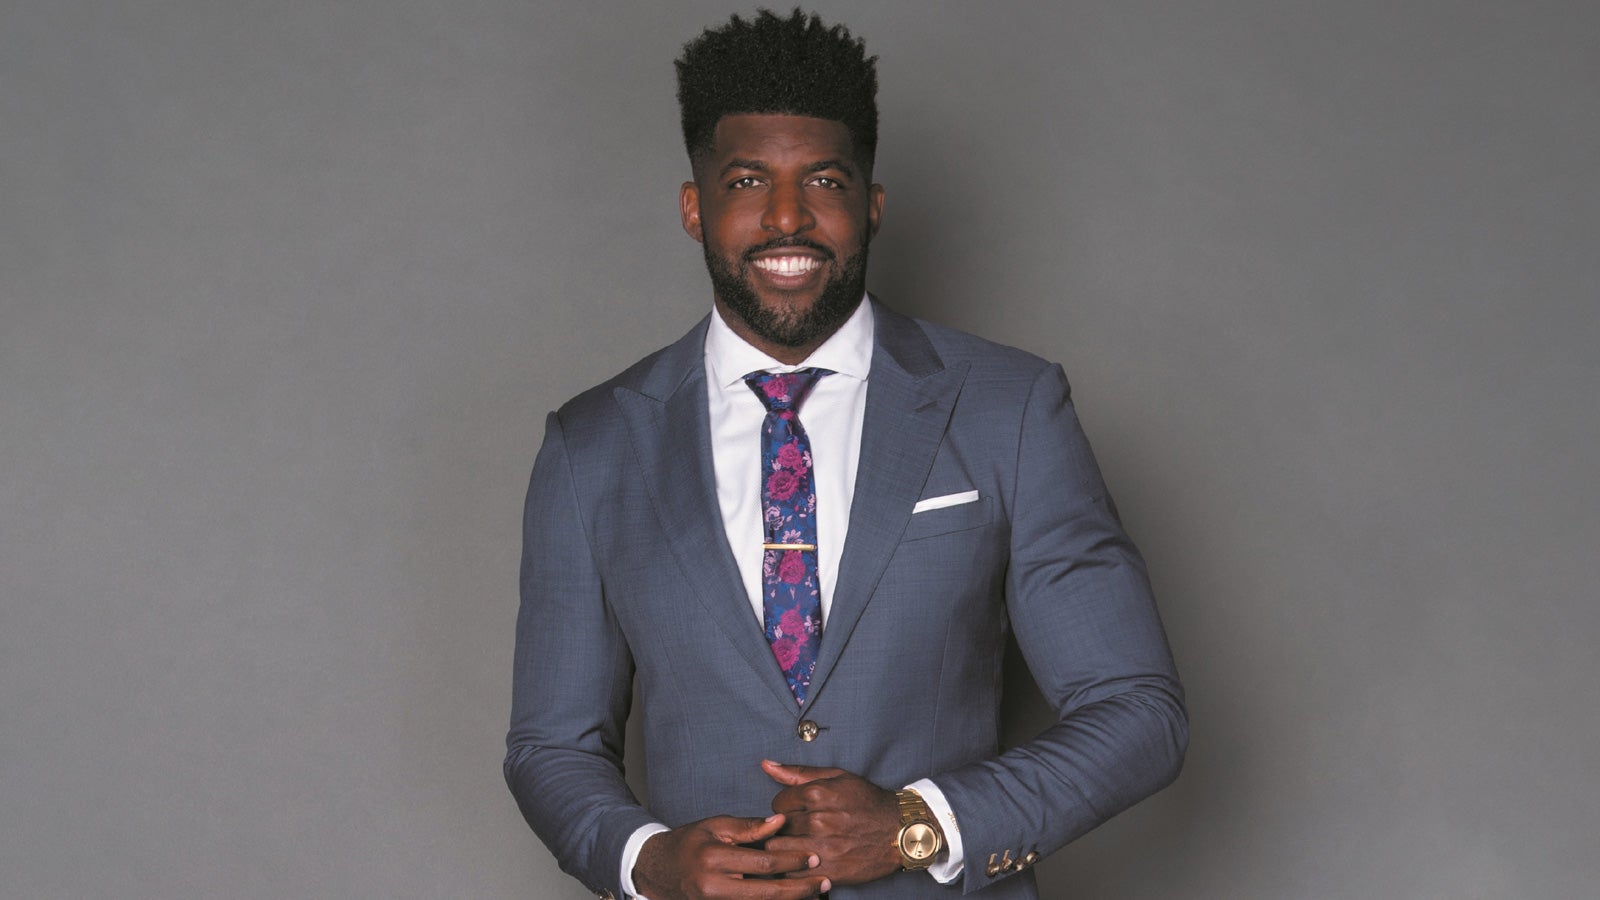 Emmanuel Acho smiling in a blue/grey suit in front of a grey background